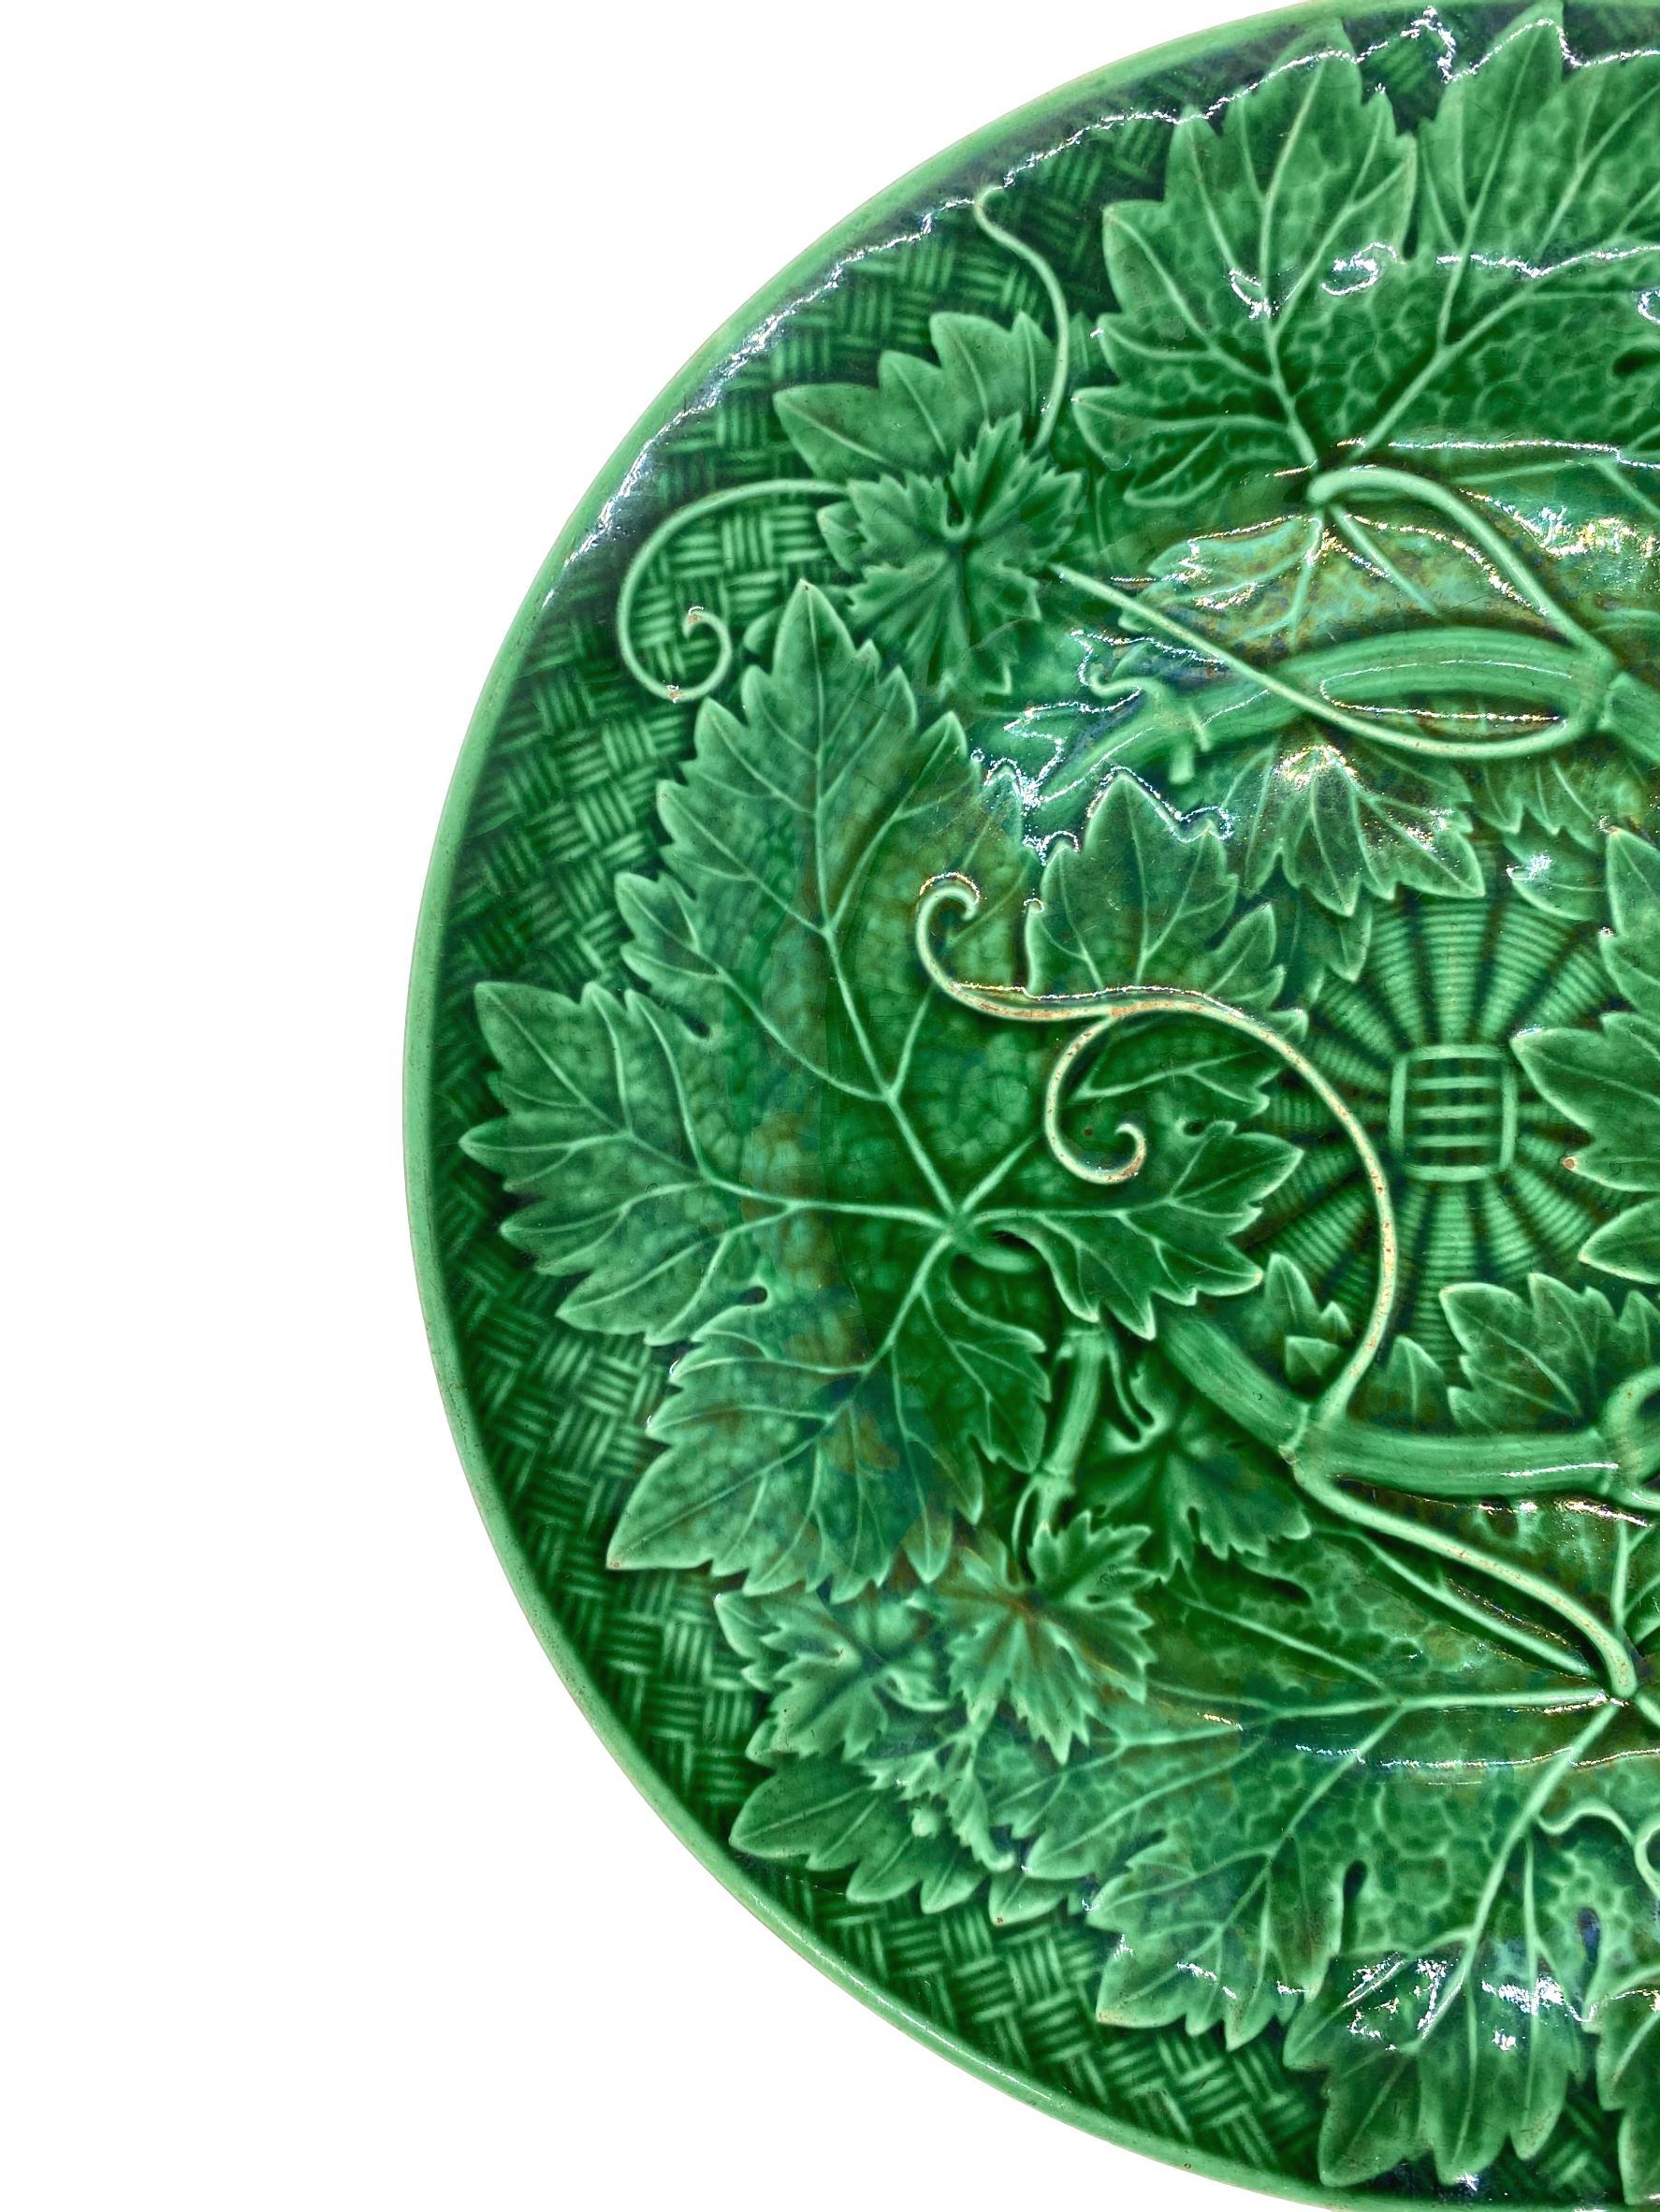 Wedgwood Majolica green glazed plate, with relief-molded grape leaves and vines, raised on a basketweave ground, the reverse with impressed mark 'WEDGWOOD.'

For 30 years we have been among the world's preeminent specialists in the finest antique